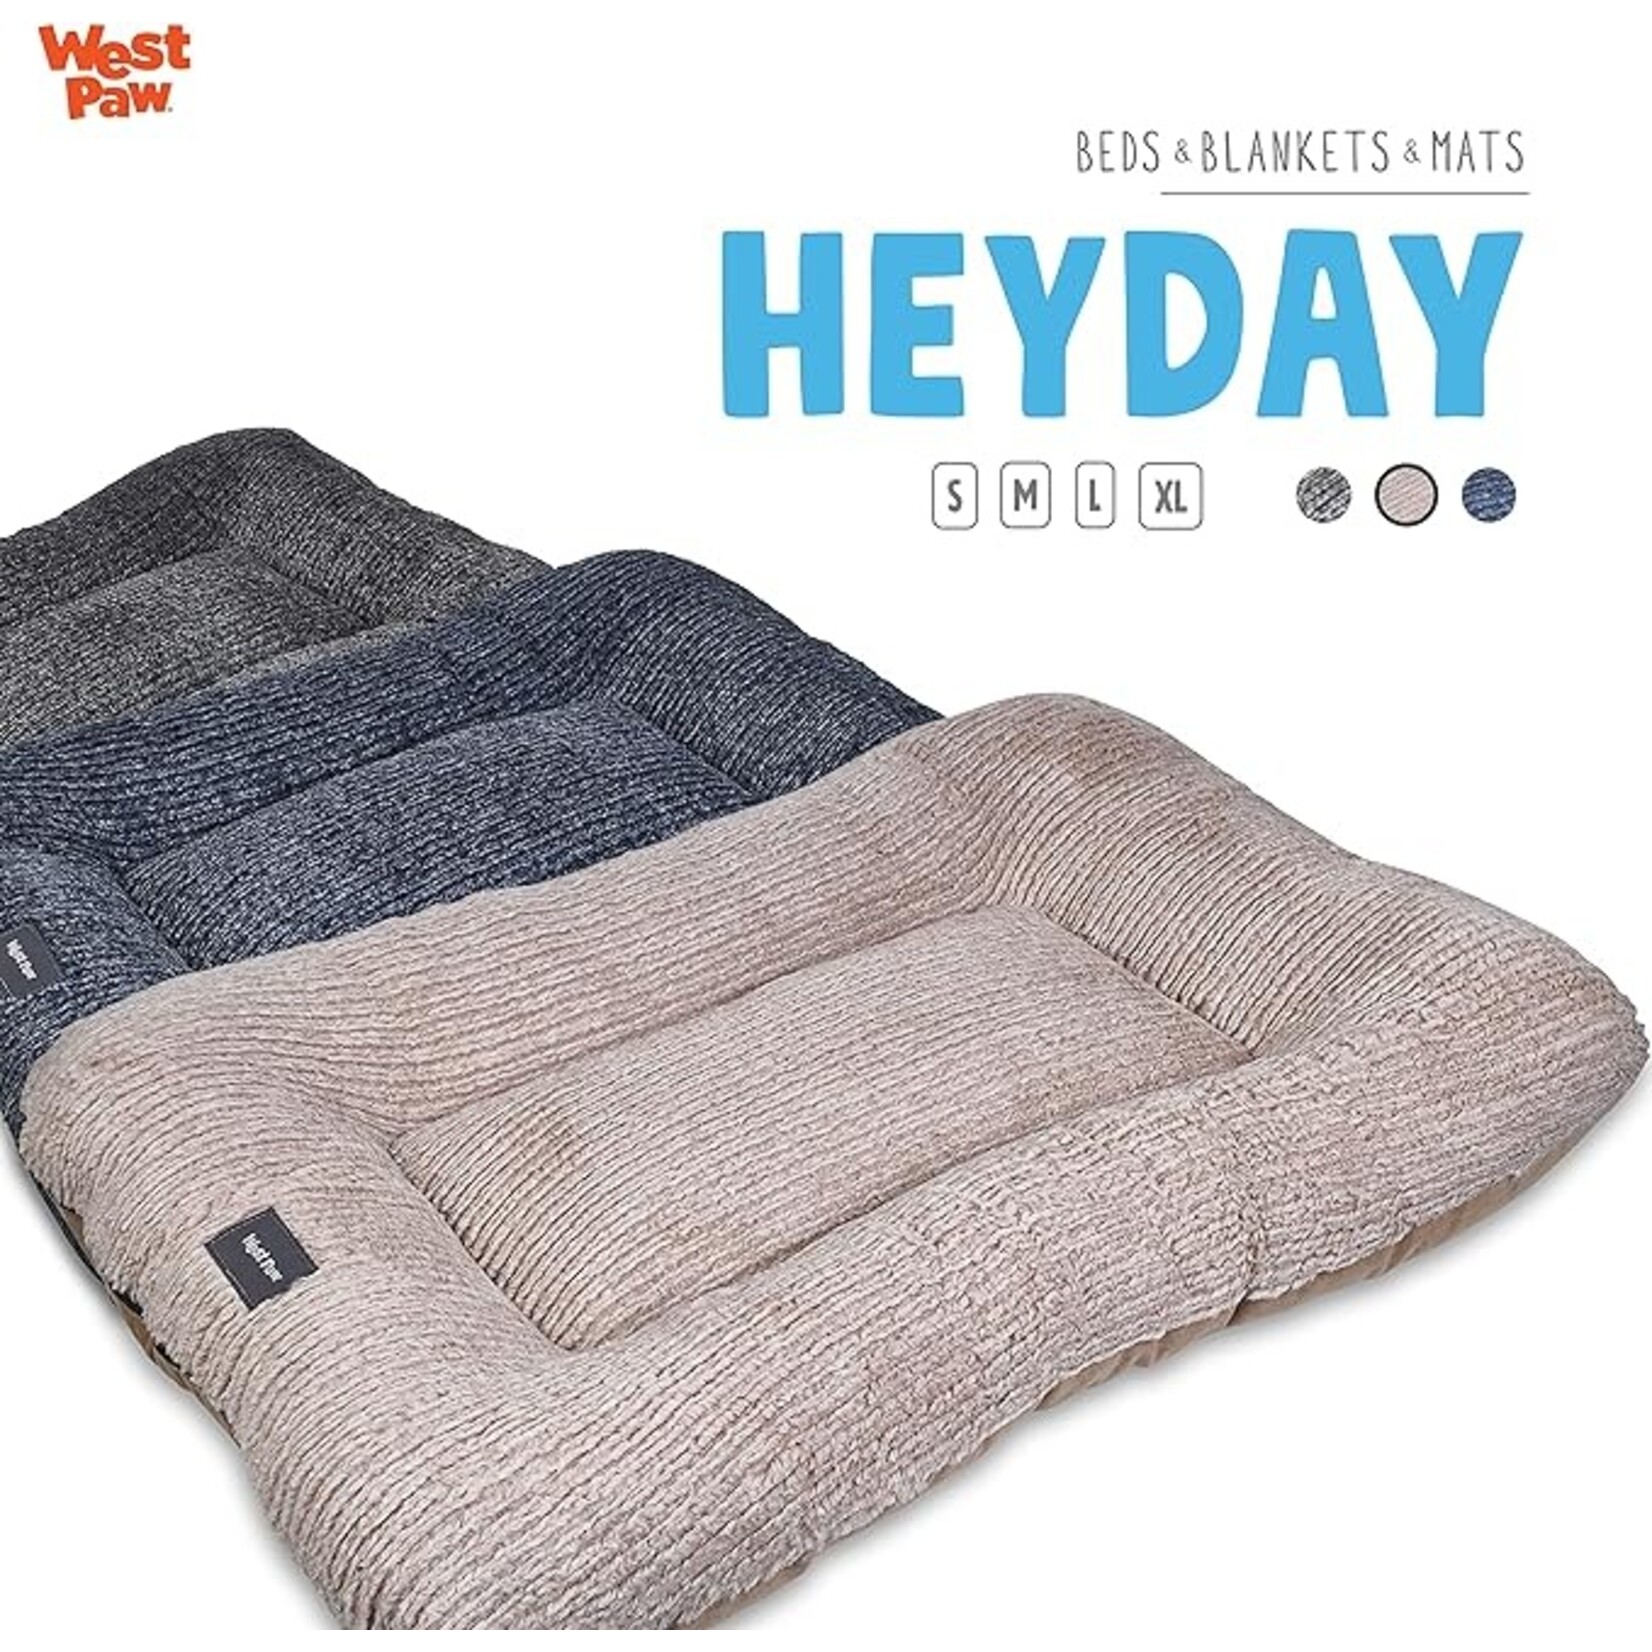 West Paw West Paw HeyDay Bed 32x22 in Ultra Soft